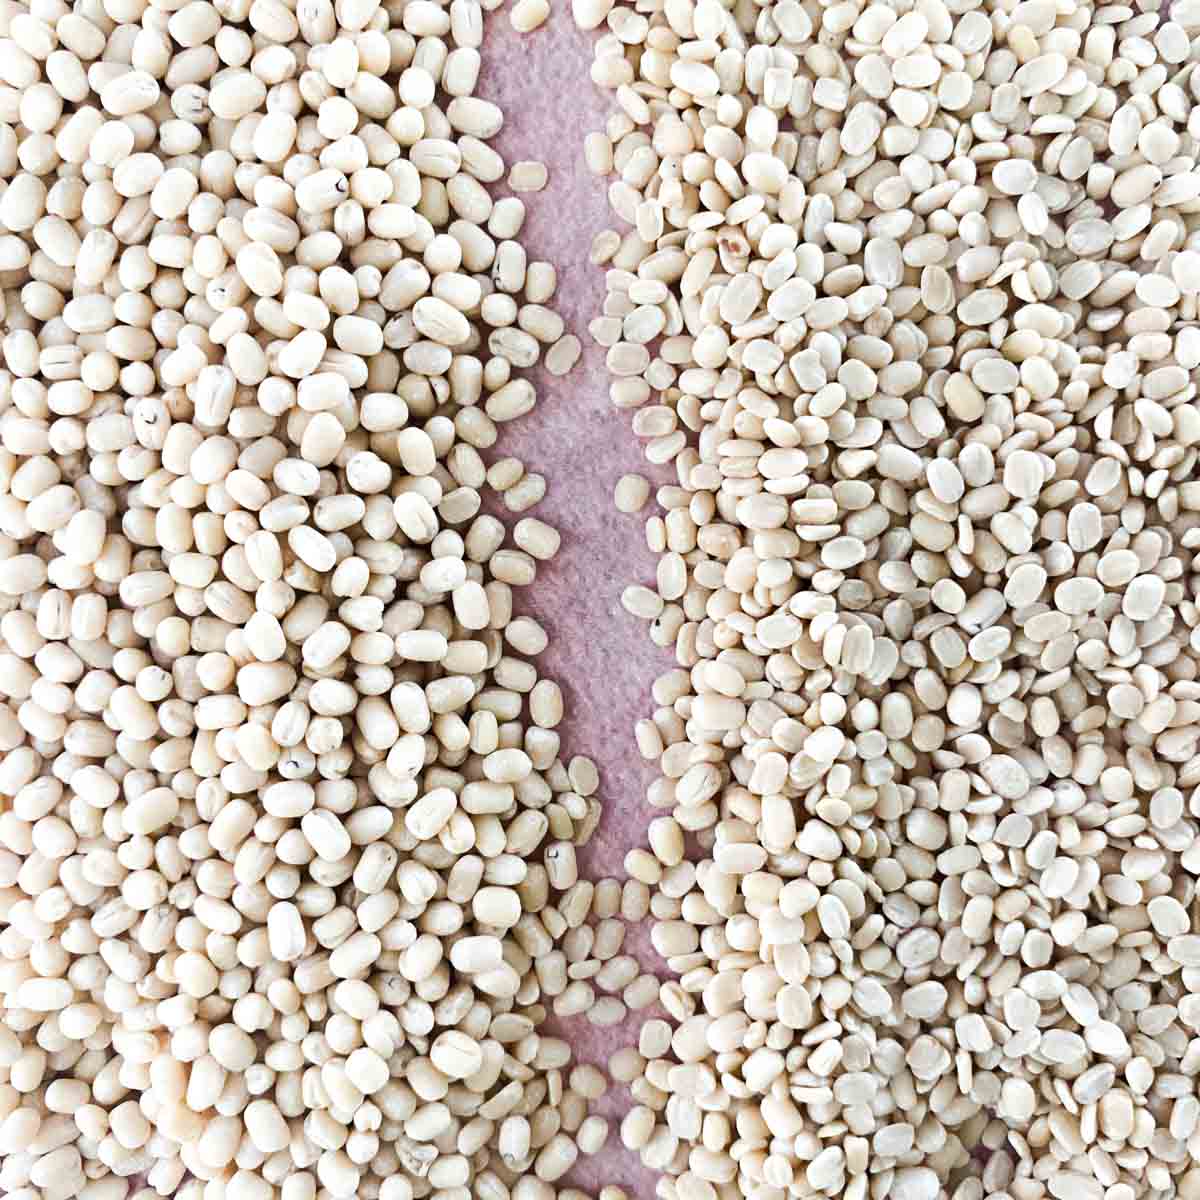 White whole urad dal on the left and white split urad dal on the right.